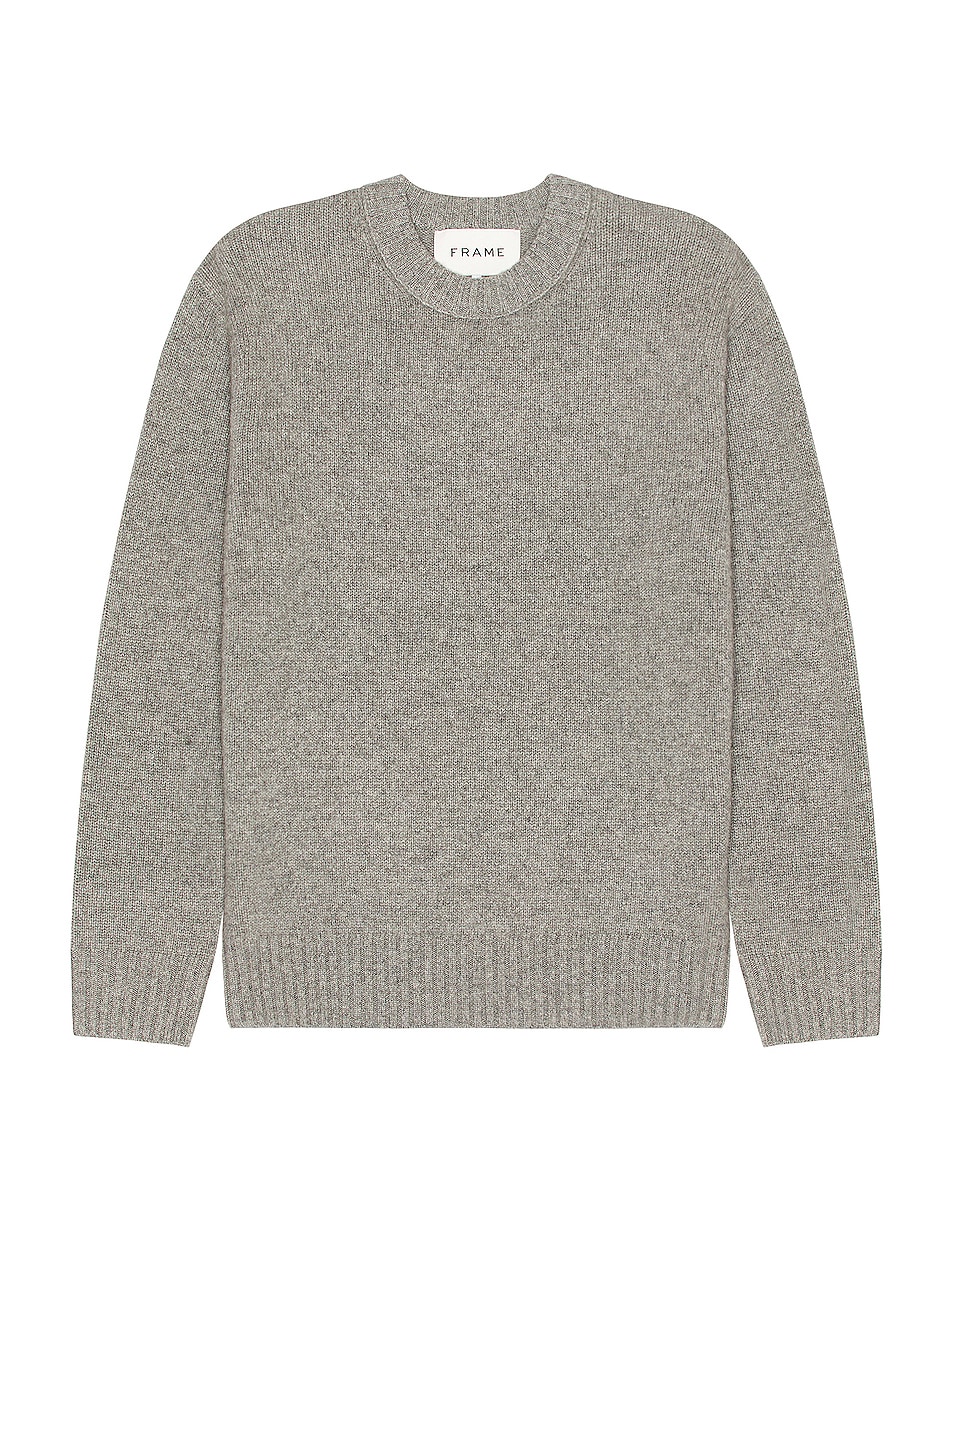 Image 1 of FRAME Cashmere Sweater in Gris